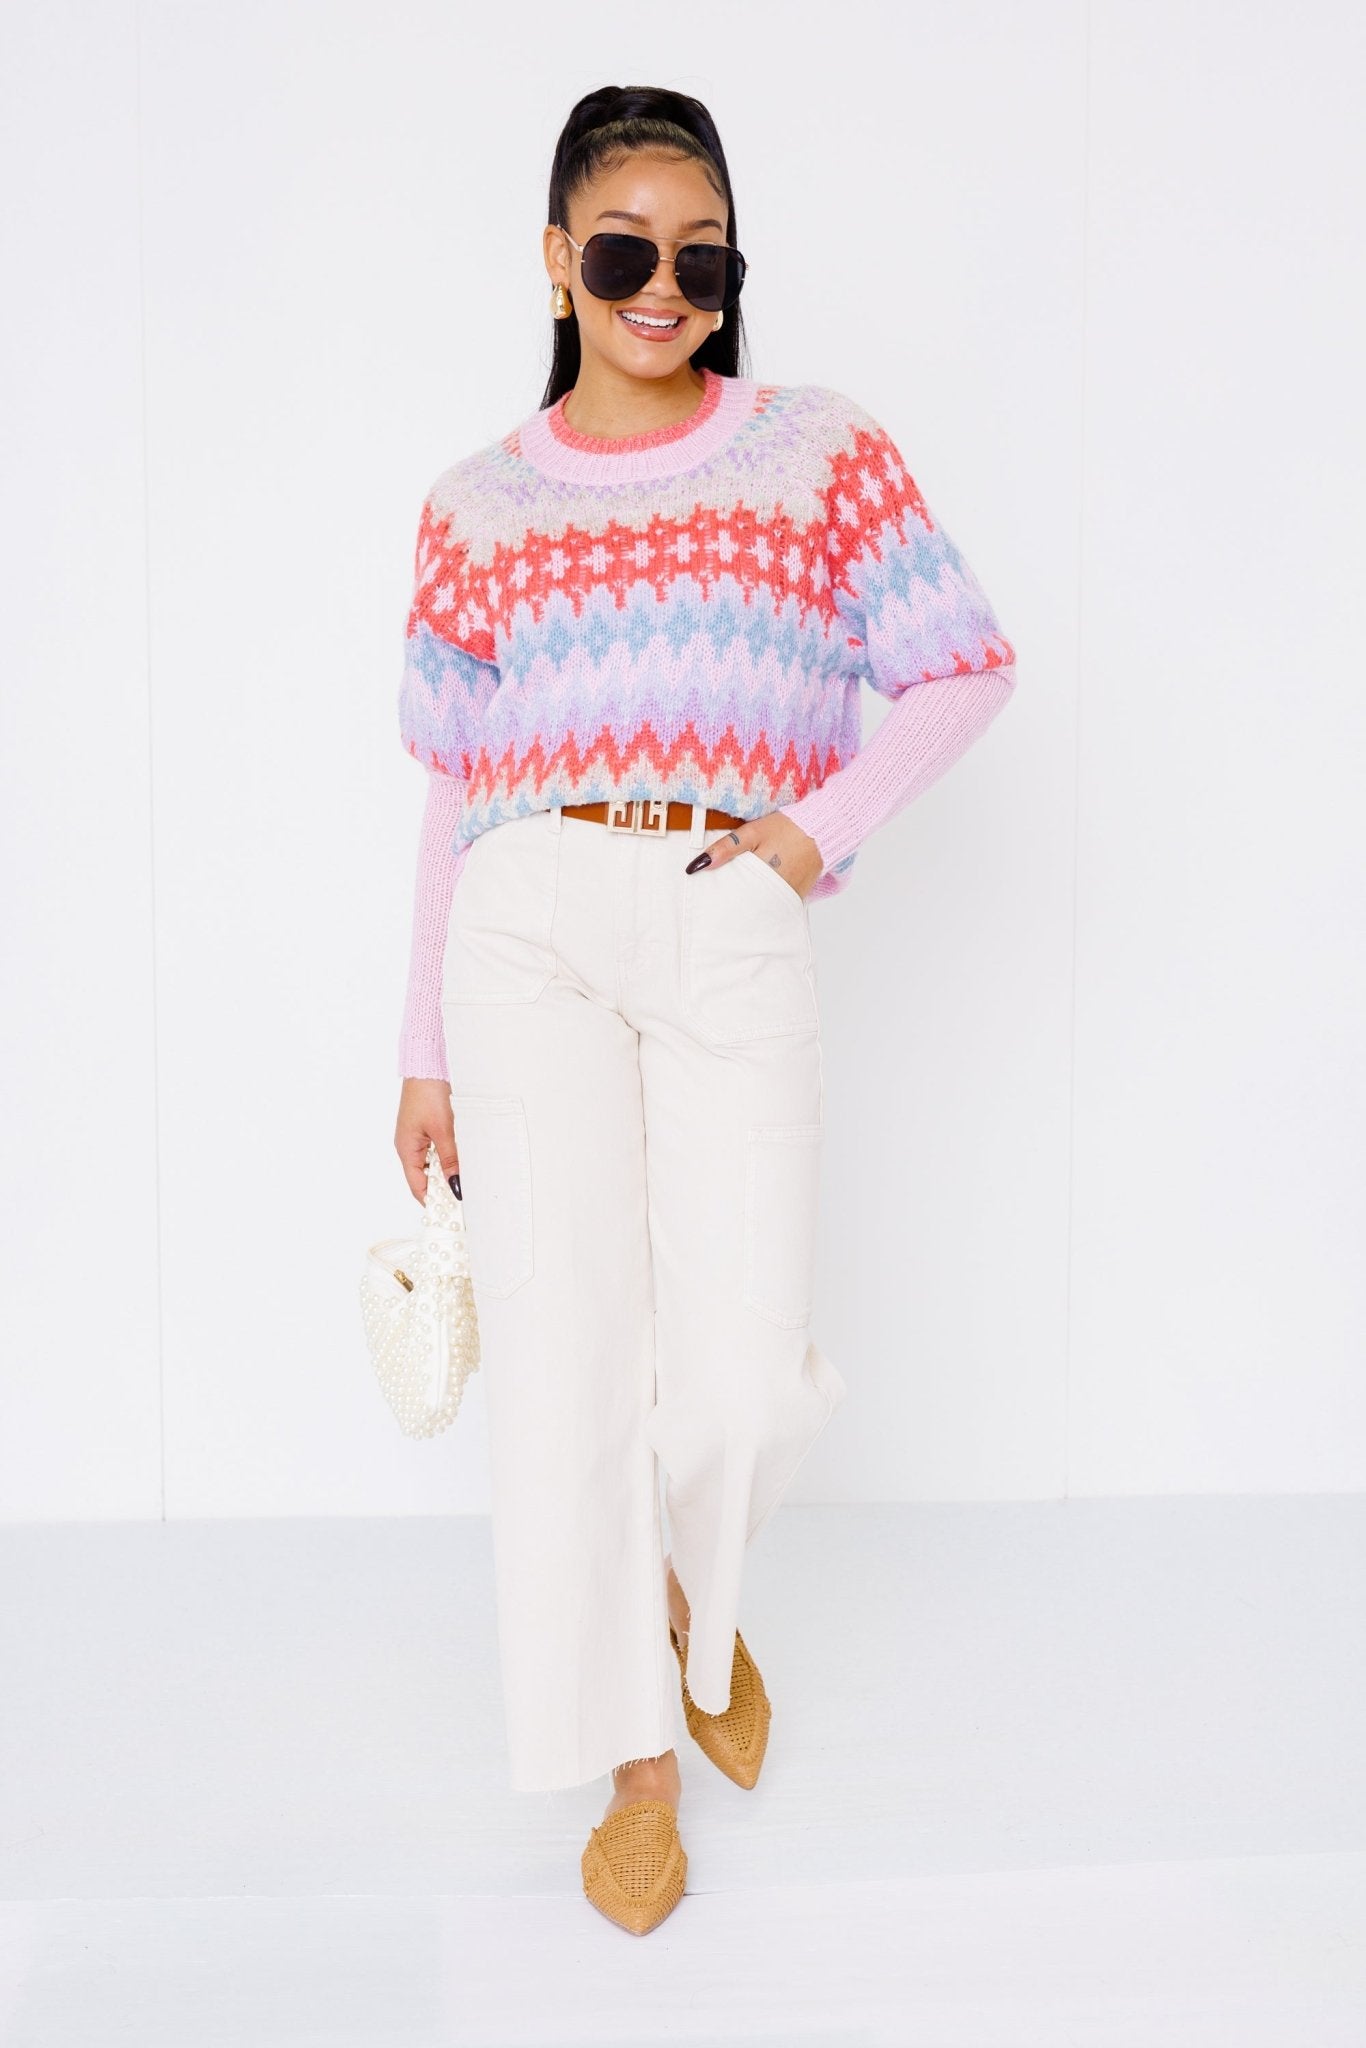 Happy Daze Sweater, LILAC/CORAL/BLUE Sweaters Over $100 - 18E